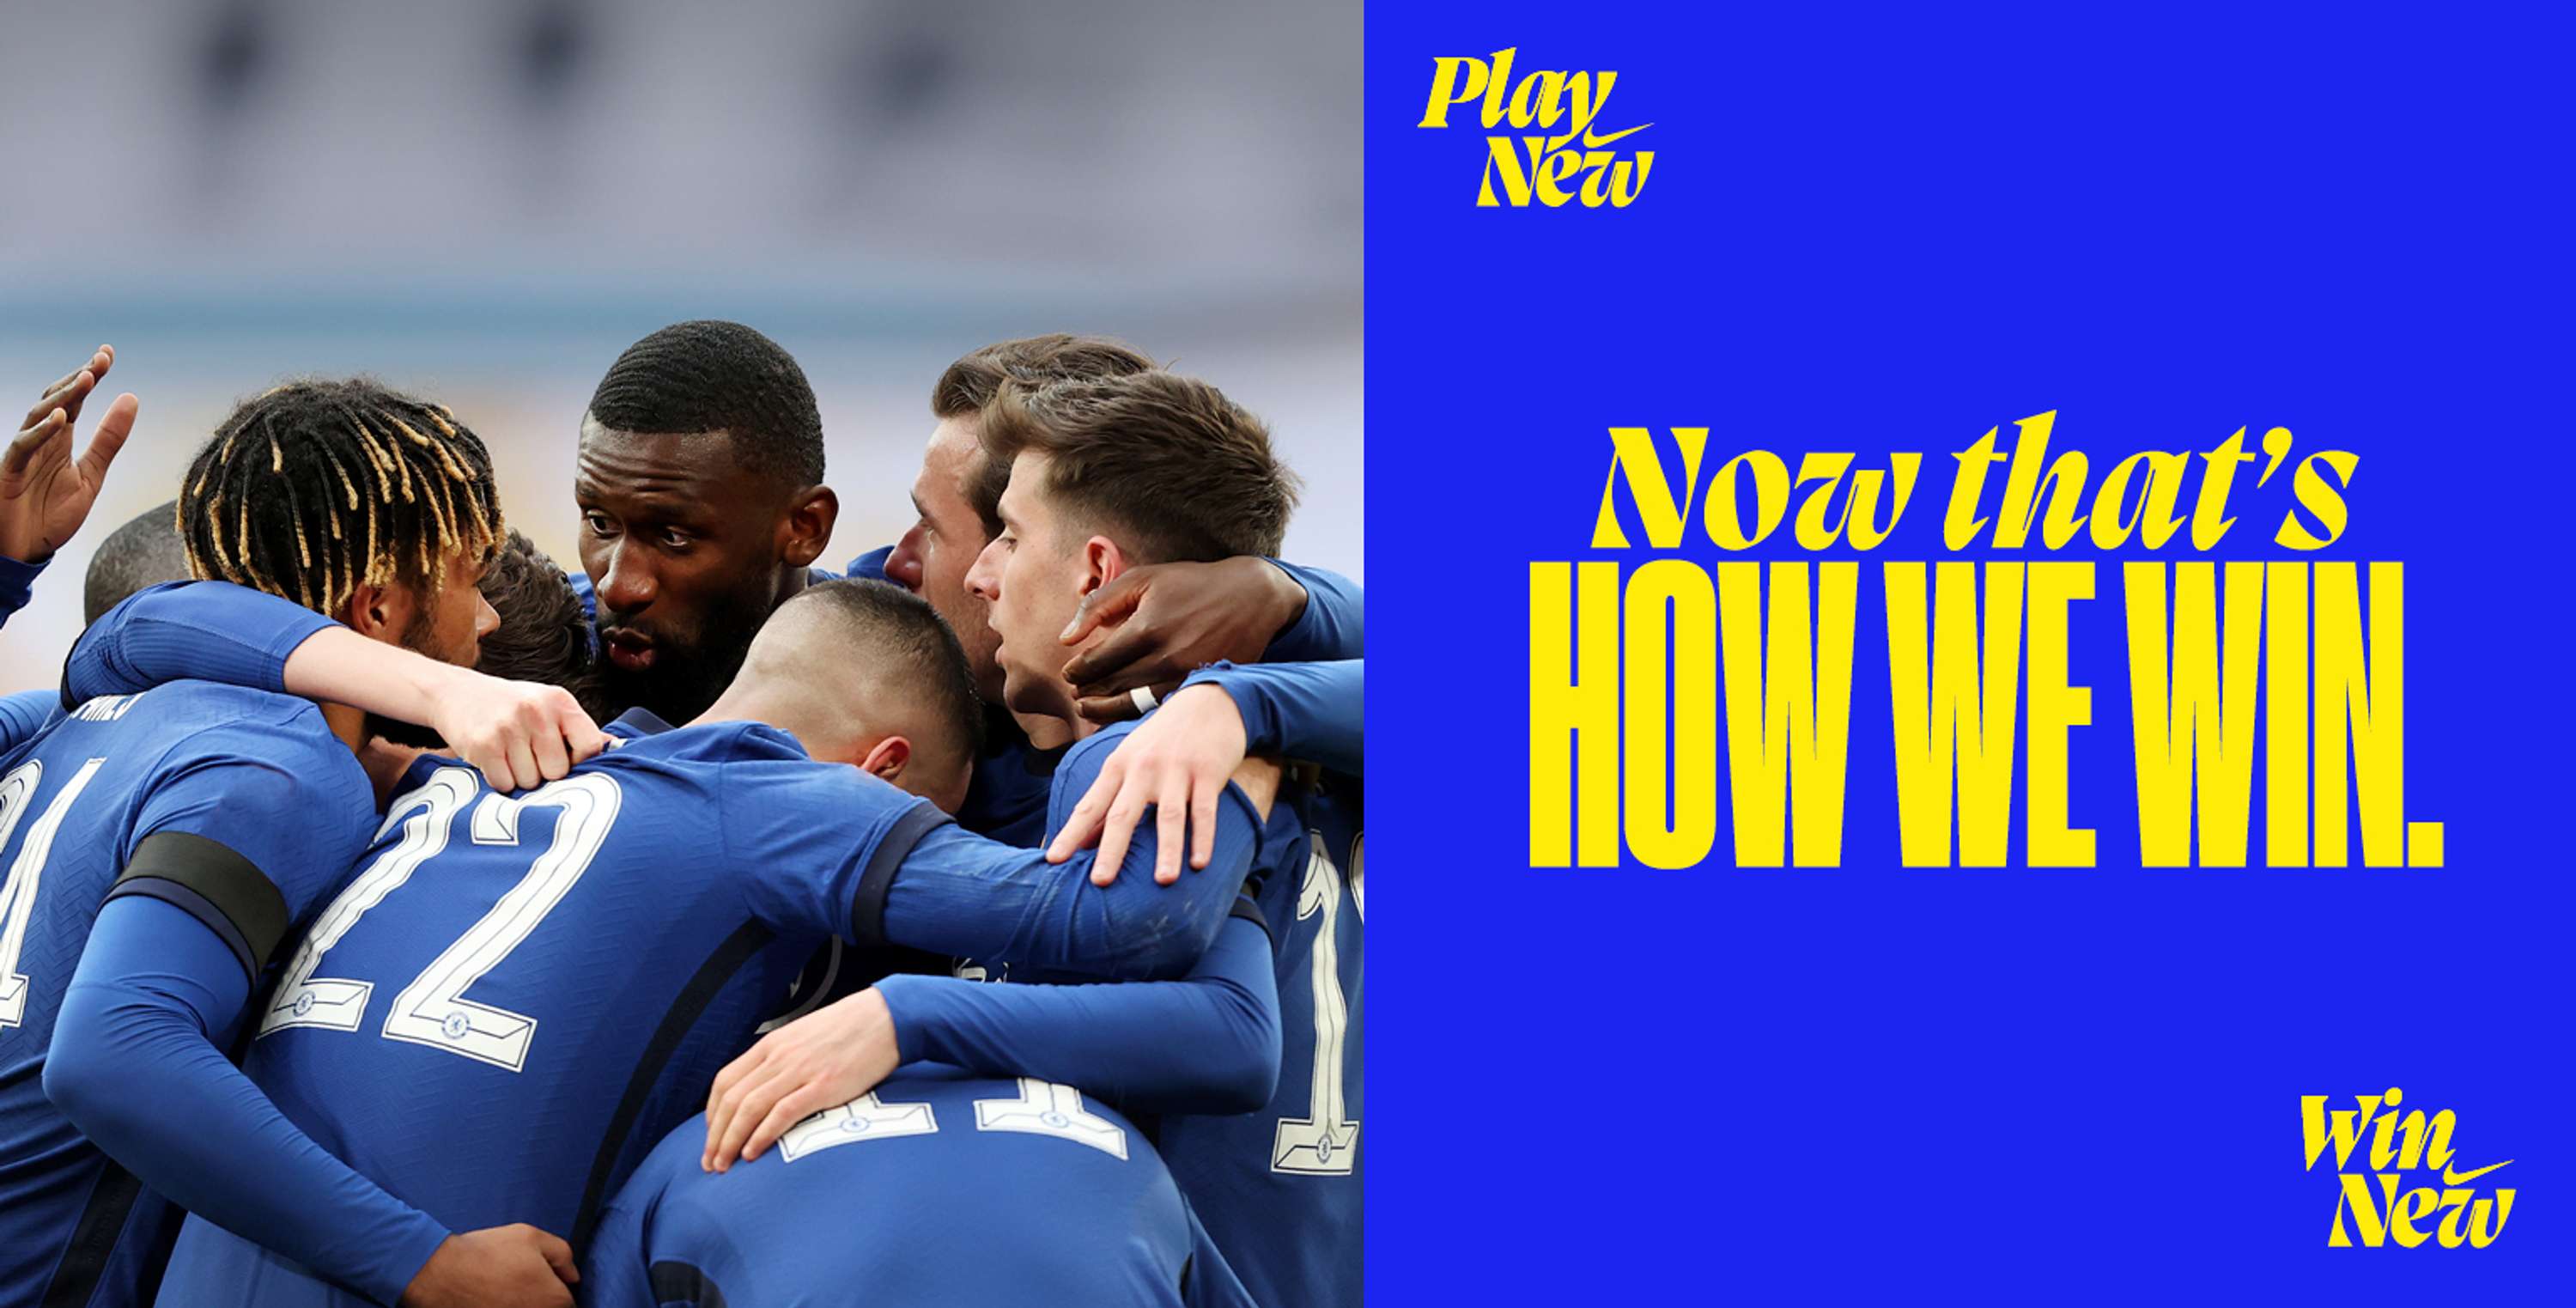 NIKE- Chelsea "Play New New" | The Dots